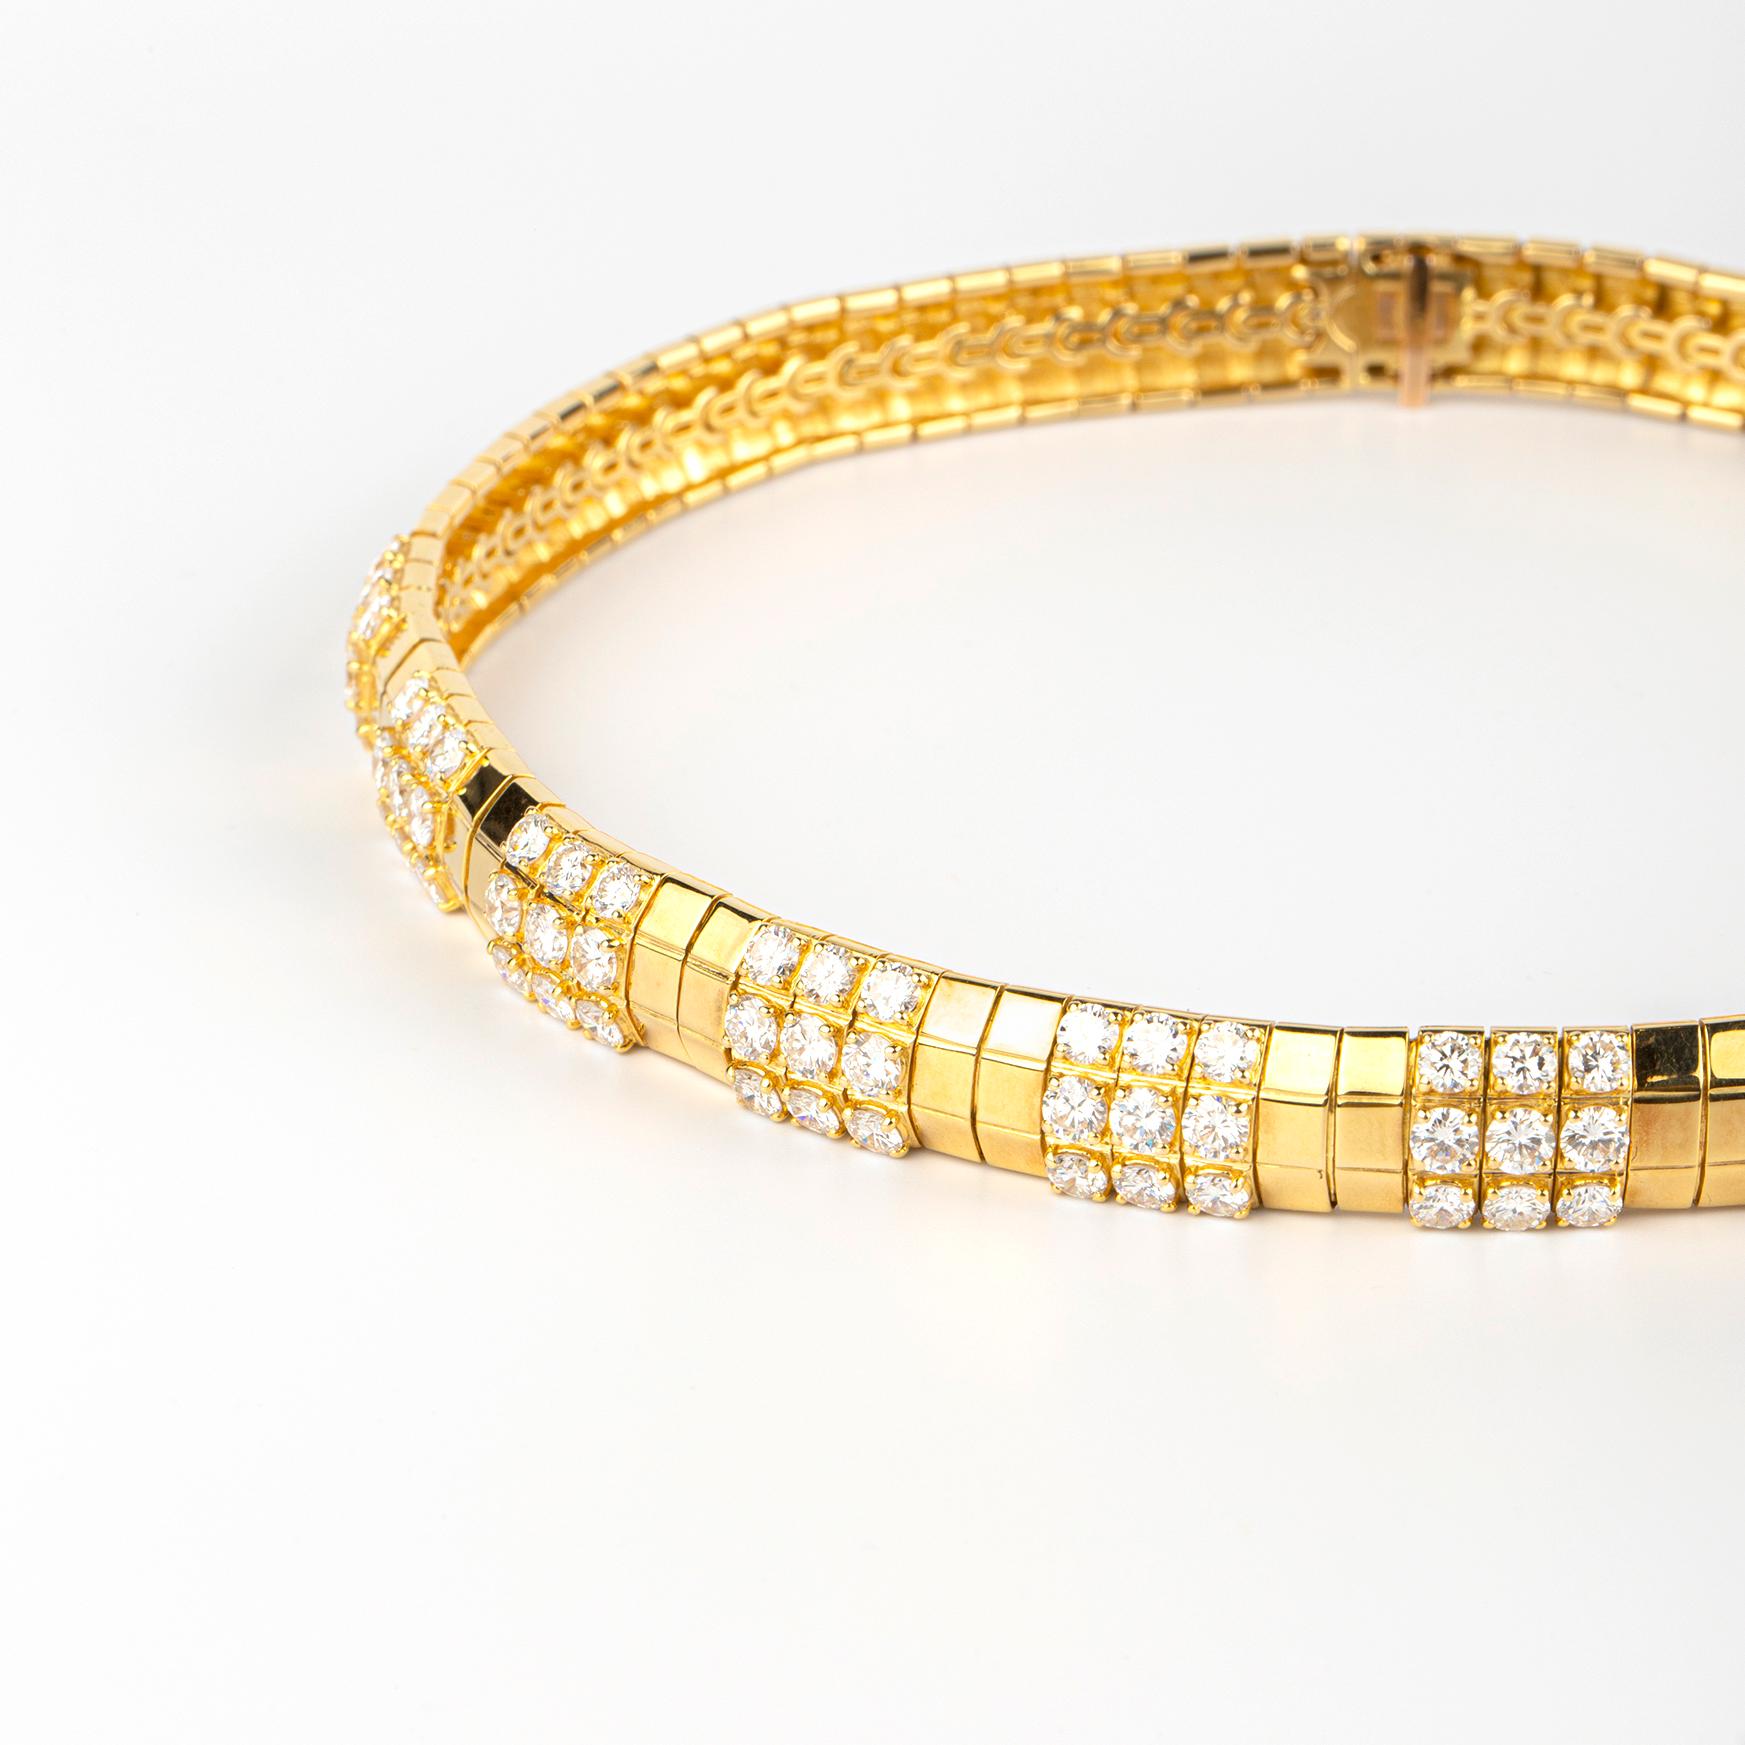 An exquisite 18k yellow gold necklace showcasing 99 round brilliant diamonds for 24 carats in total, set in a geometric design. Made in France, circa 1970.